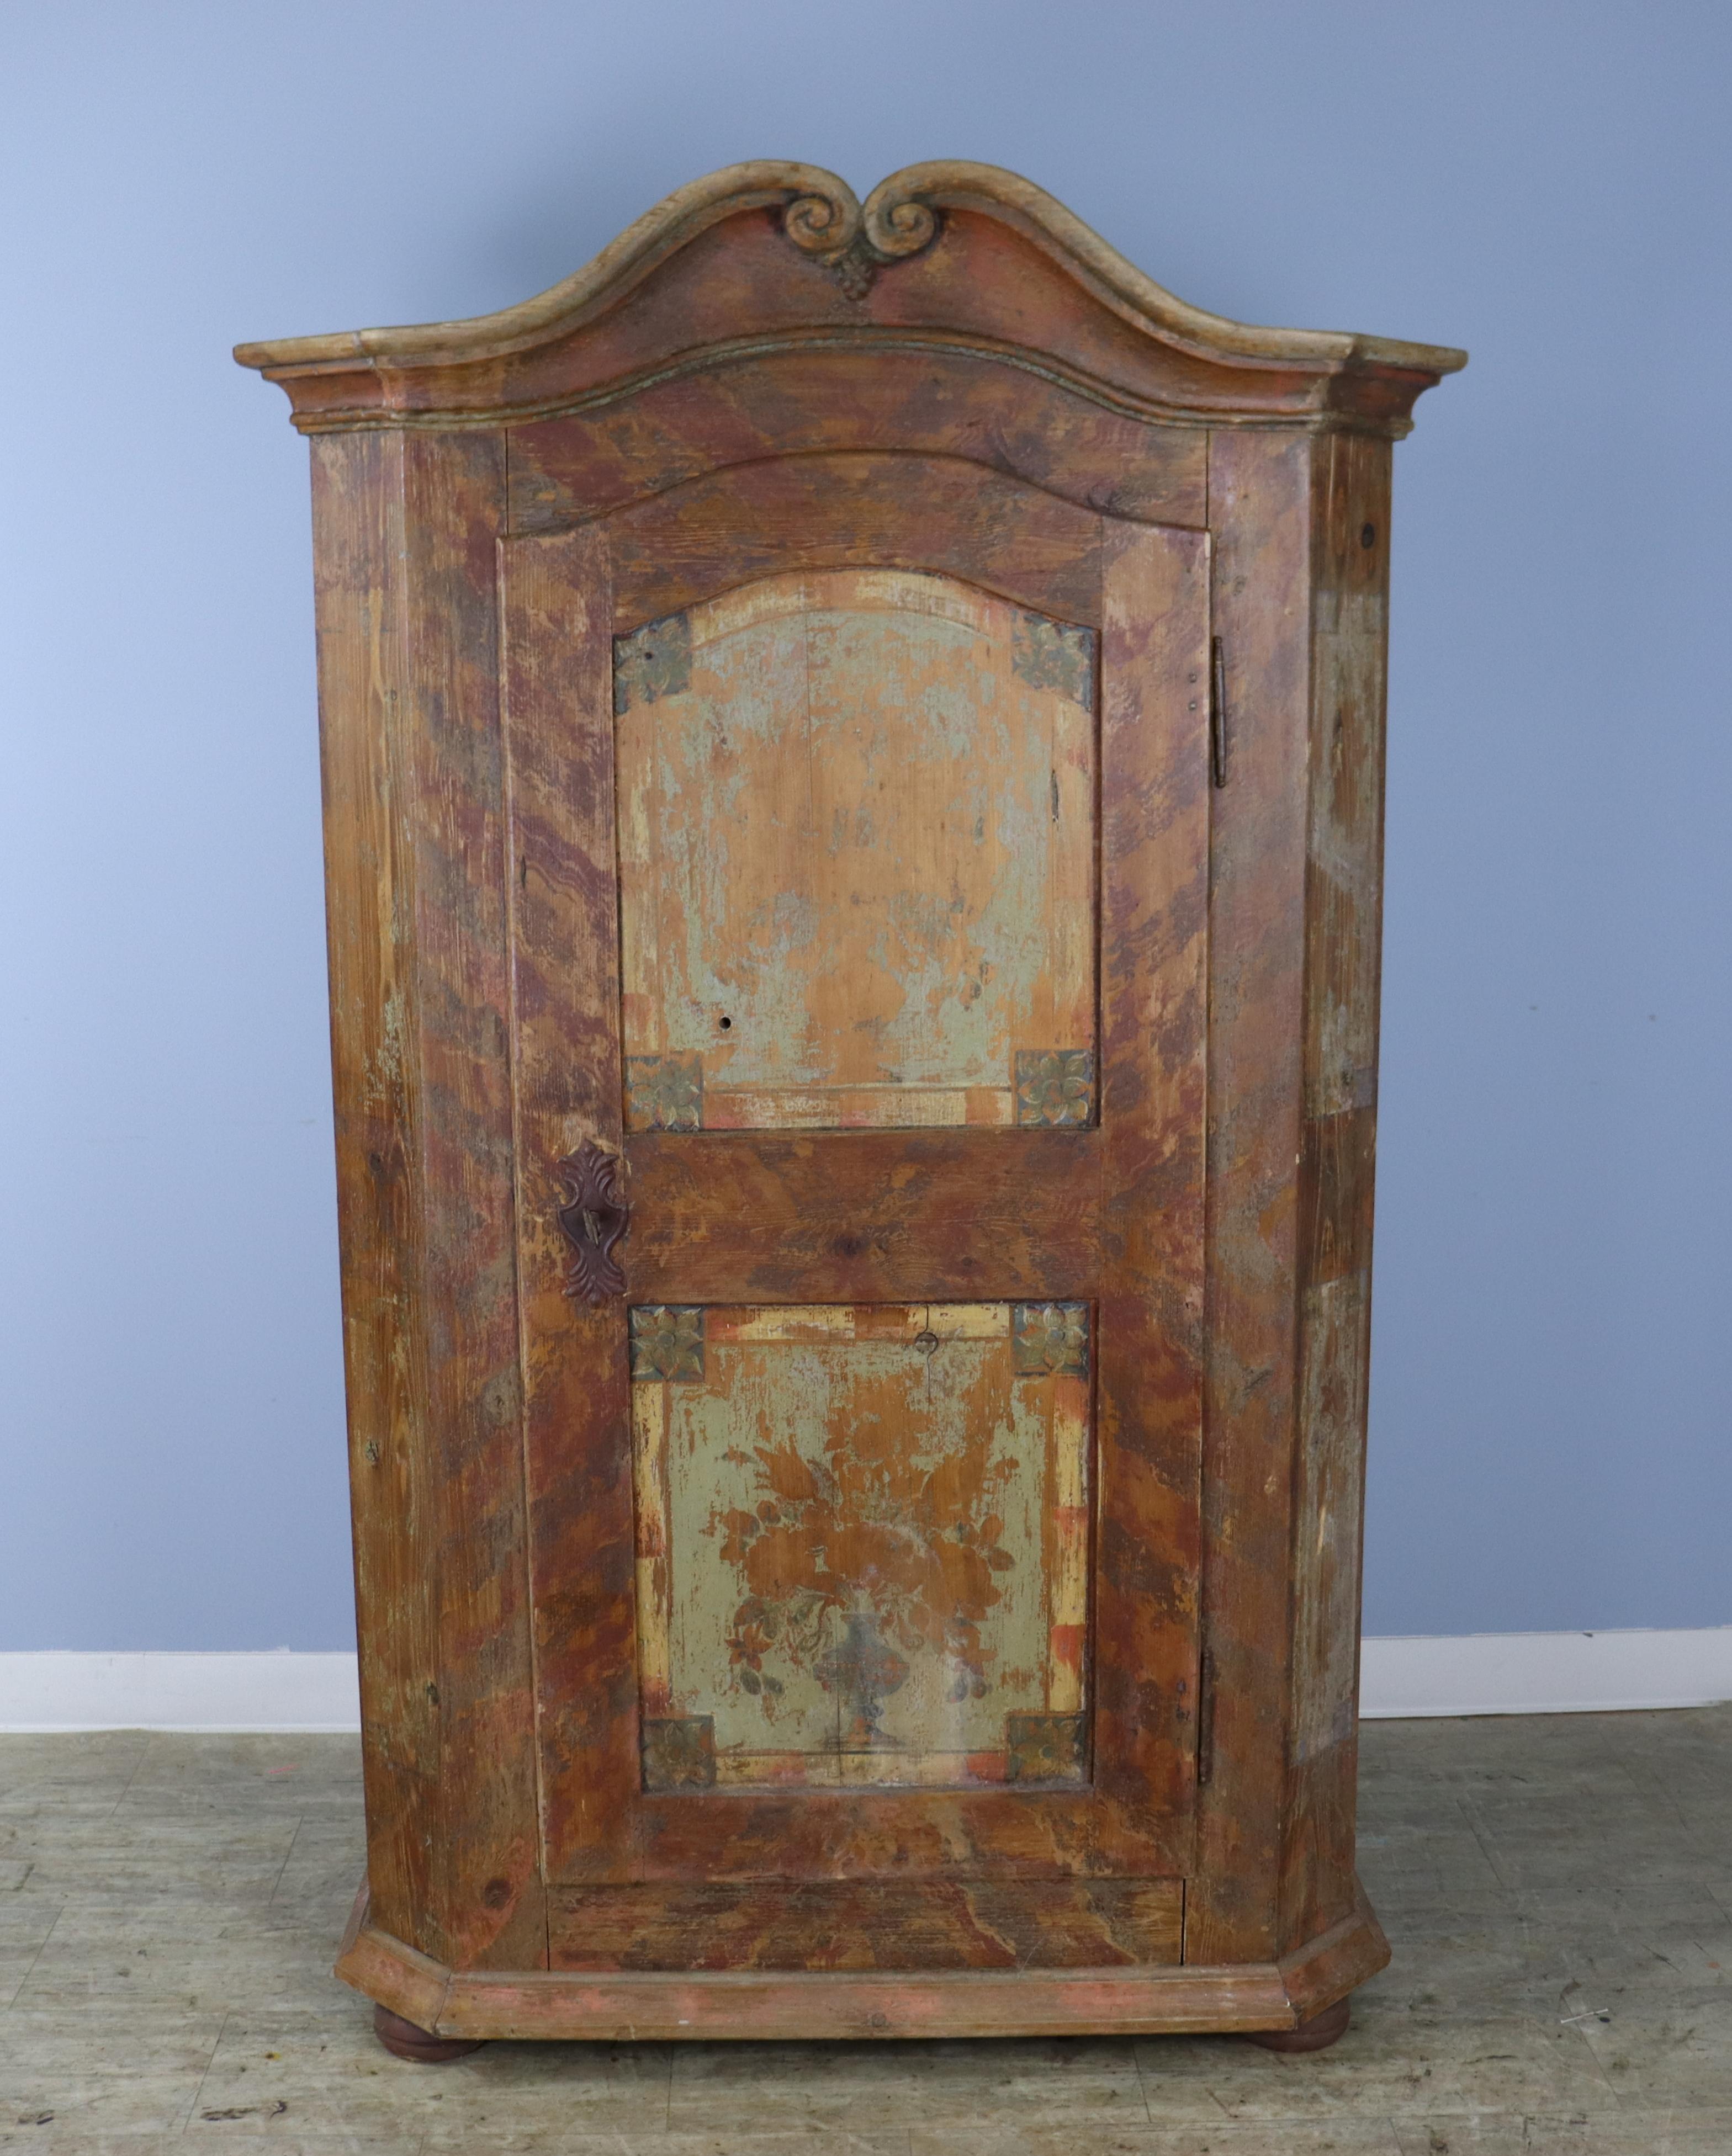 This 1890's  cabinet is a 19th Century copy of an early 18th Century French piece, faux distressed at the time it was made.   Inside, the piece is quite clean and has a roomy storage shelf as well as a bar for hanging clothes. The outstanding